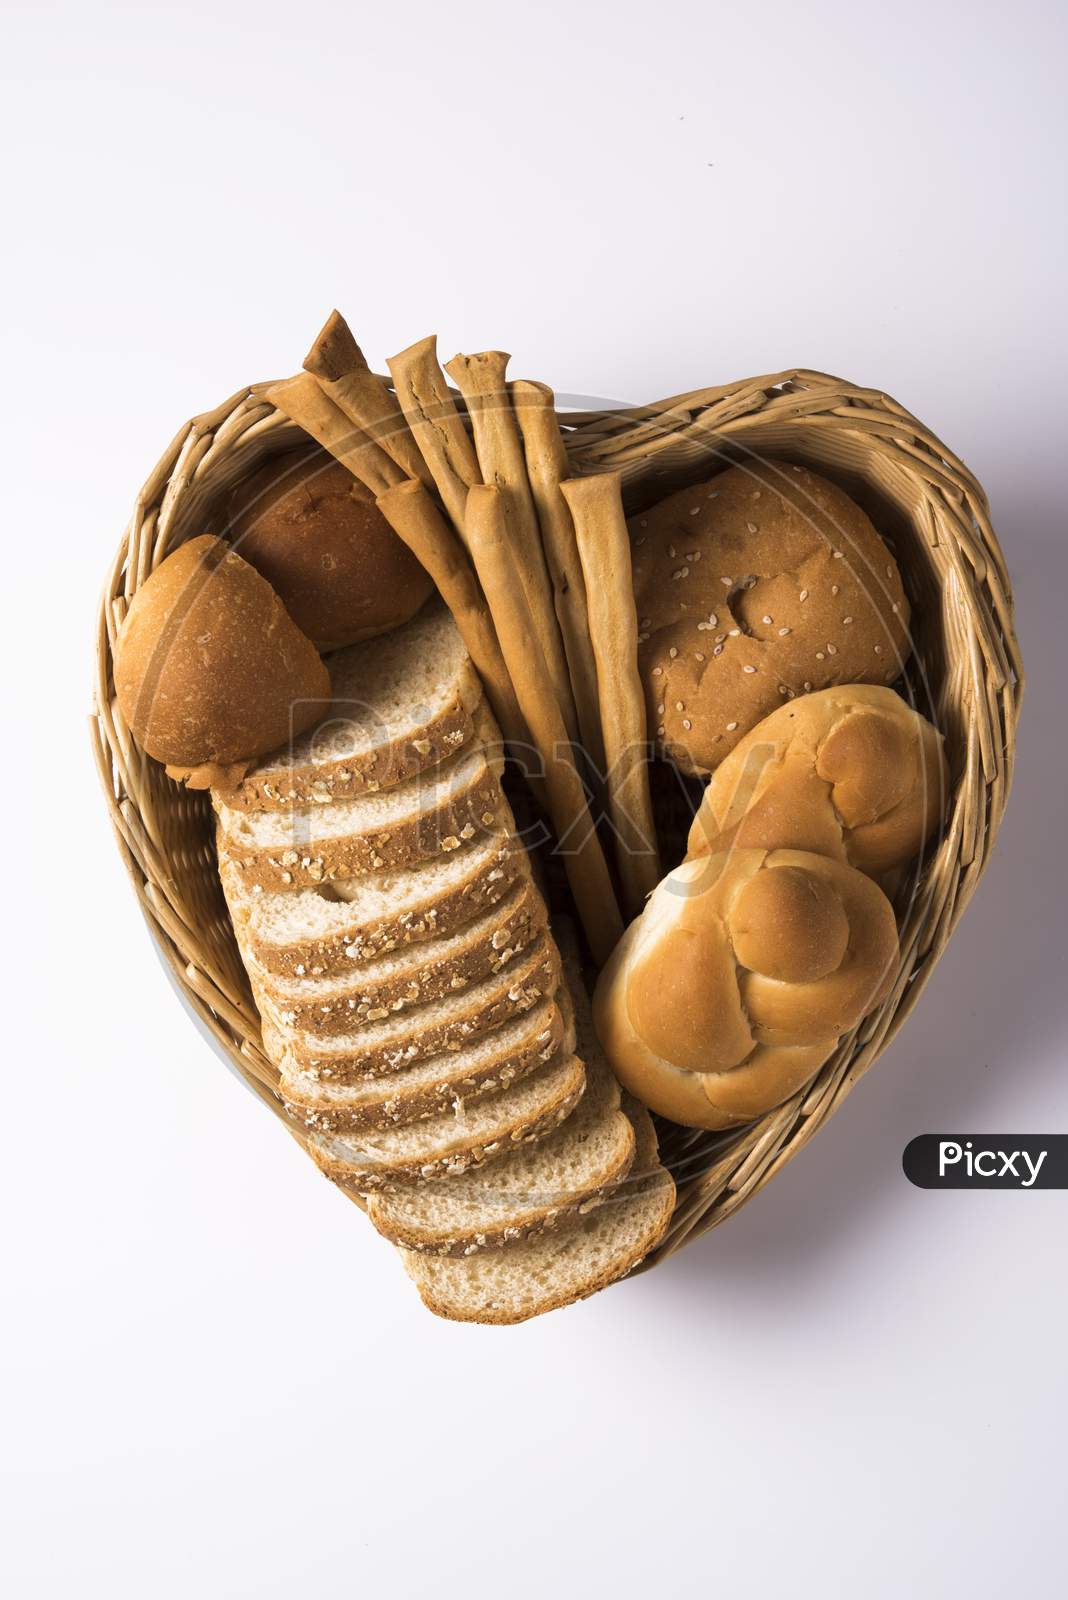 Variety of assorted fresh bread from bakery, served in a basket / tray